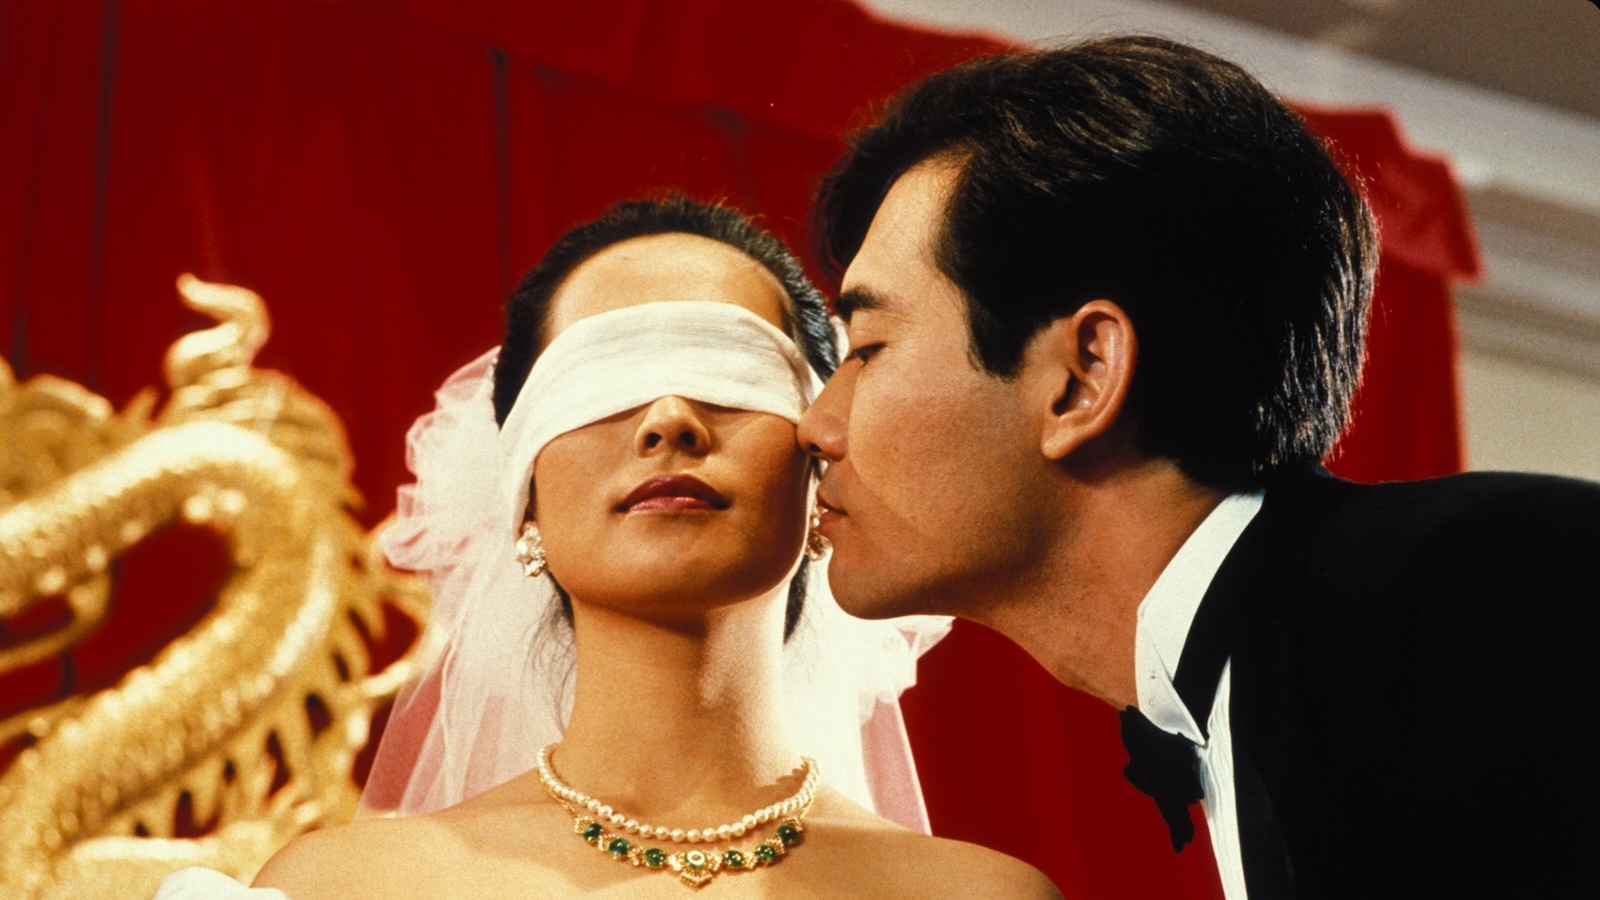 A man ina tuxedo leans over to kiss a blindfolded bride from the side